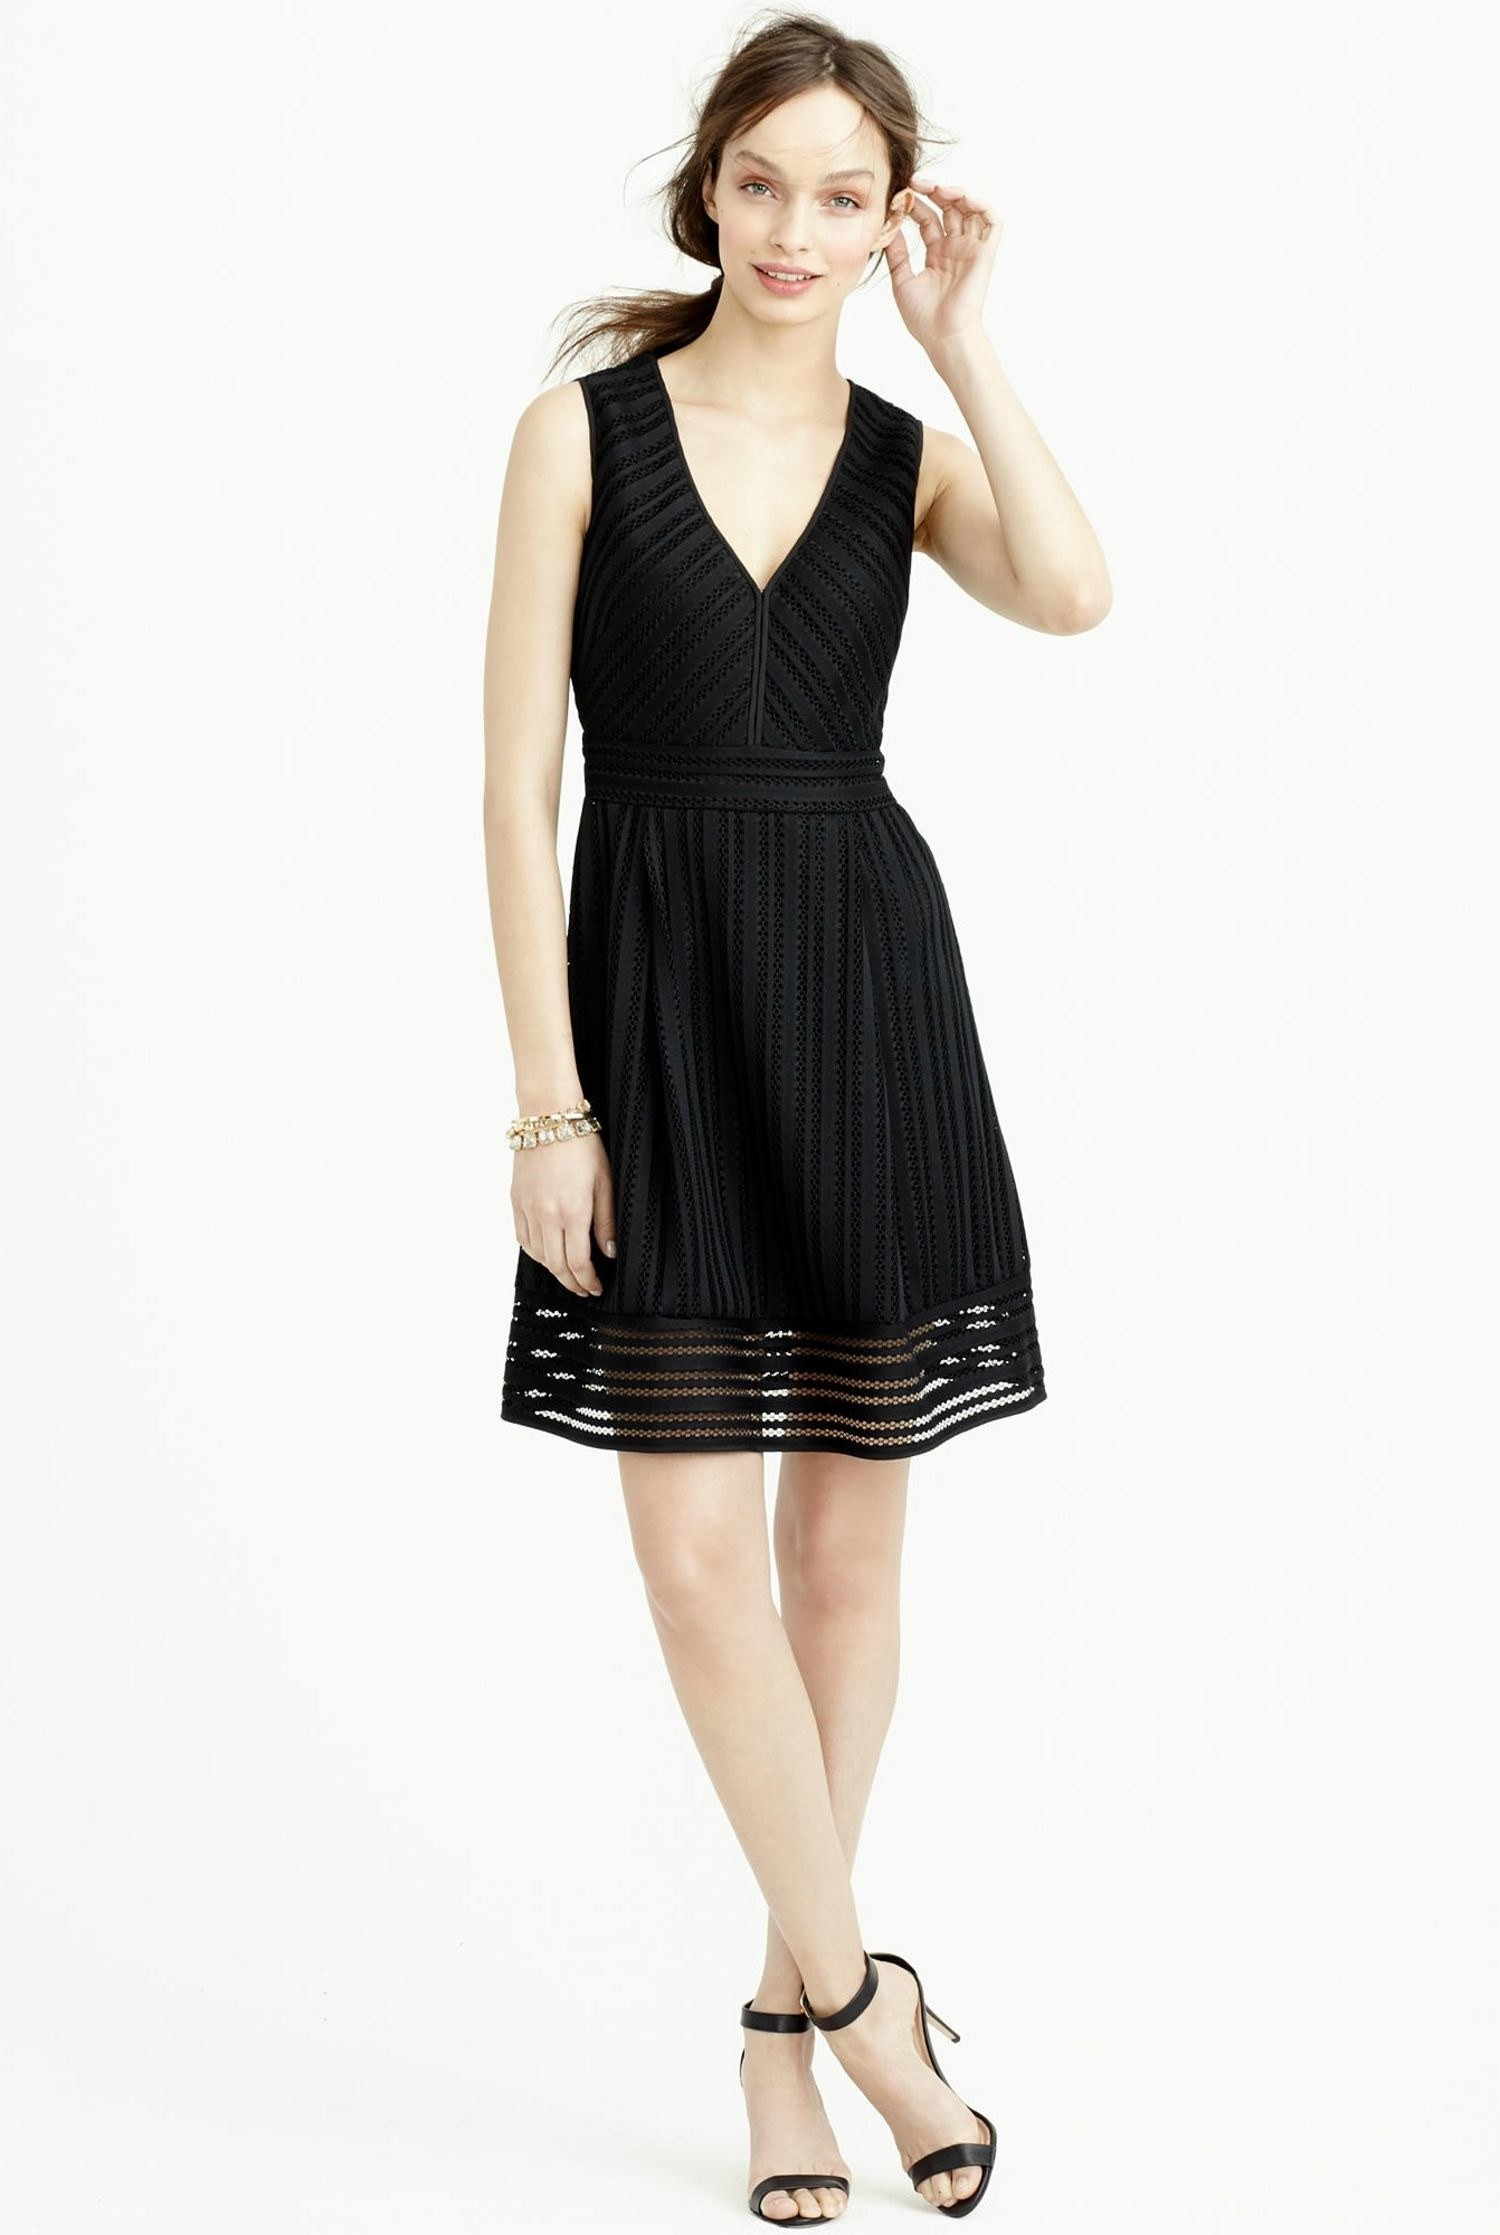 Black Dress For Wedding Guest
 Can You Wear Black to a Wedding Wedding Guests Wearing